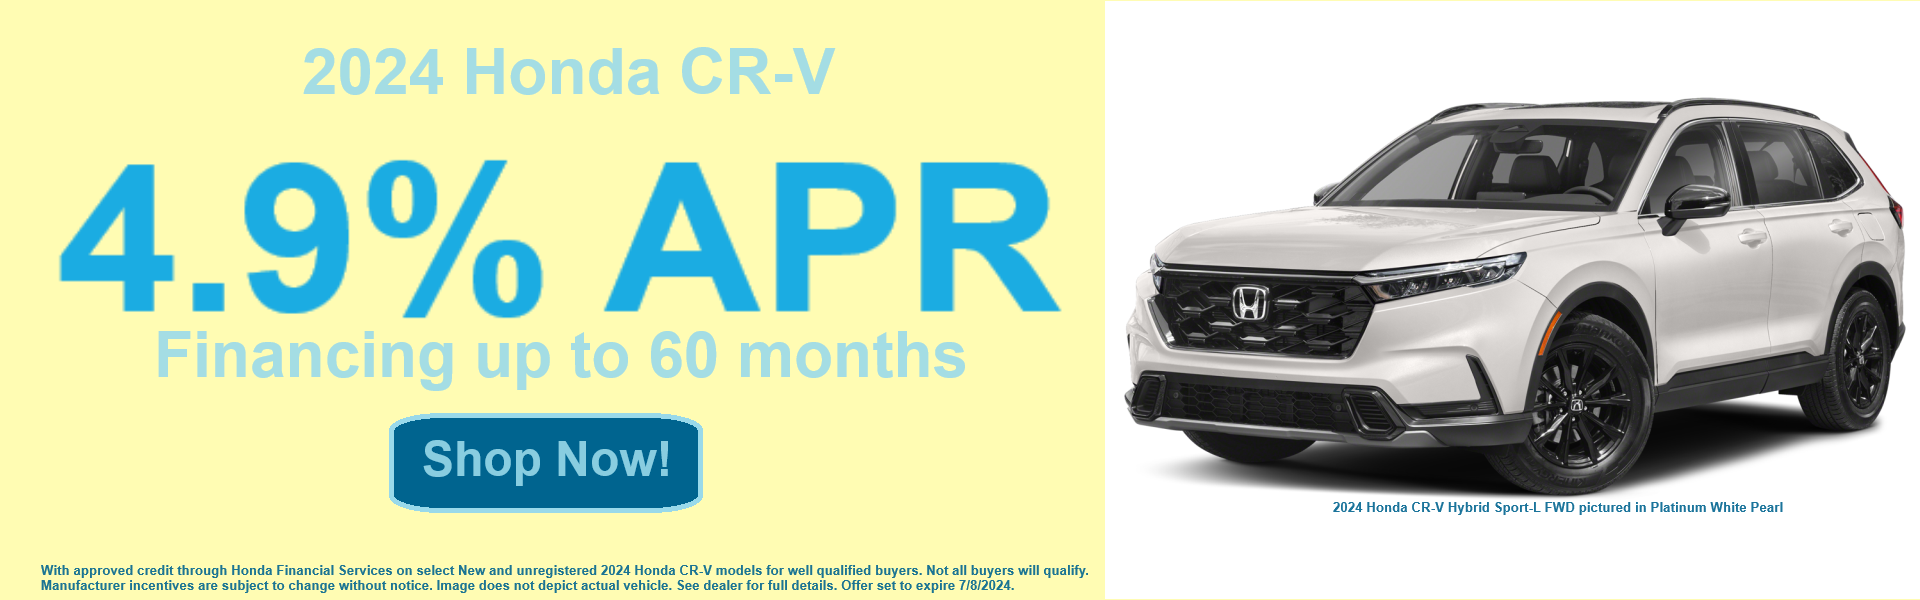 Honda CR-V APR Banner with yellow background